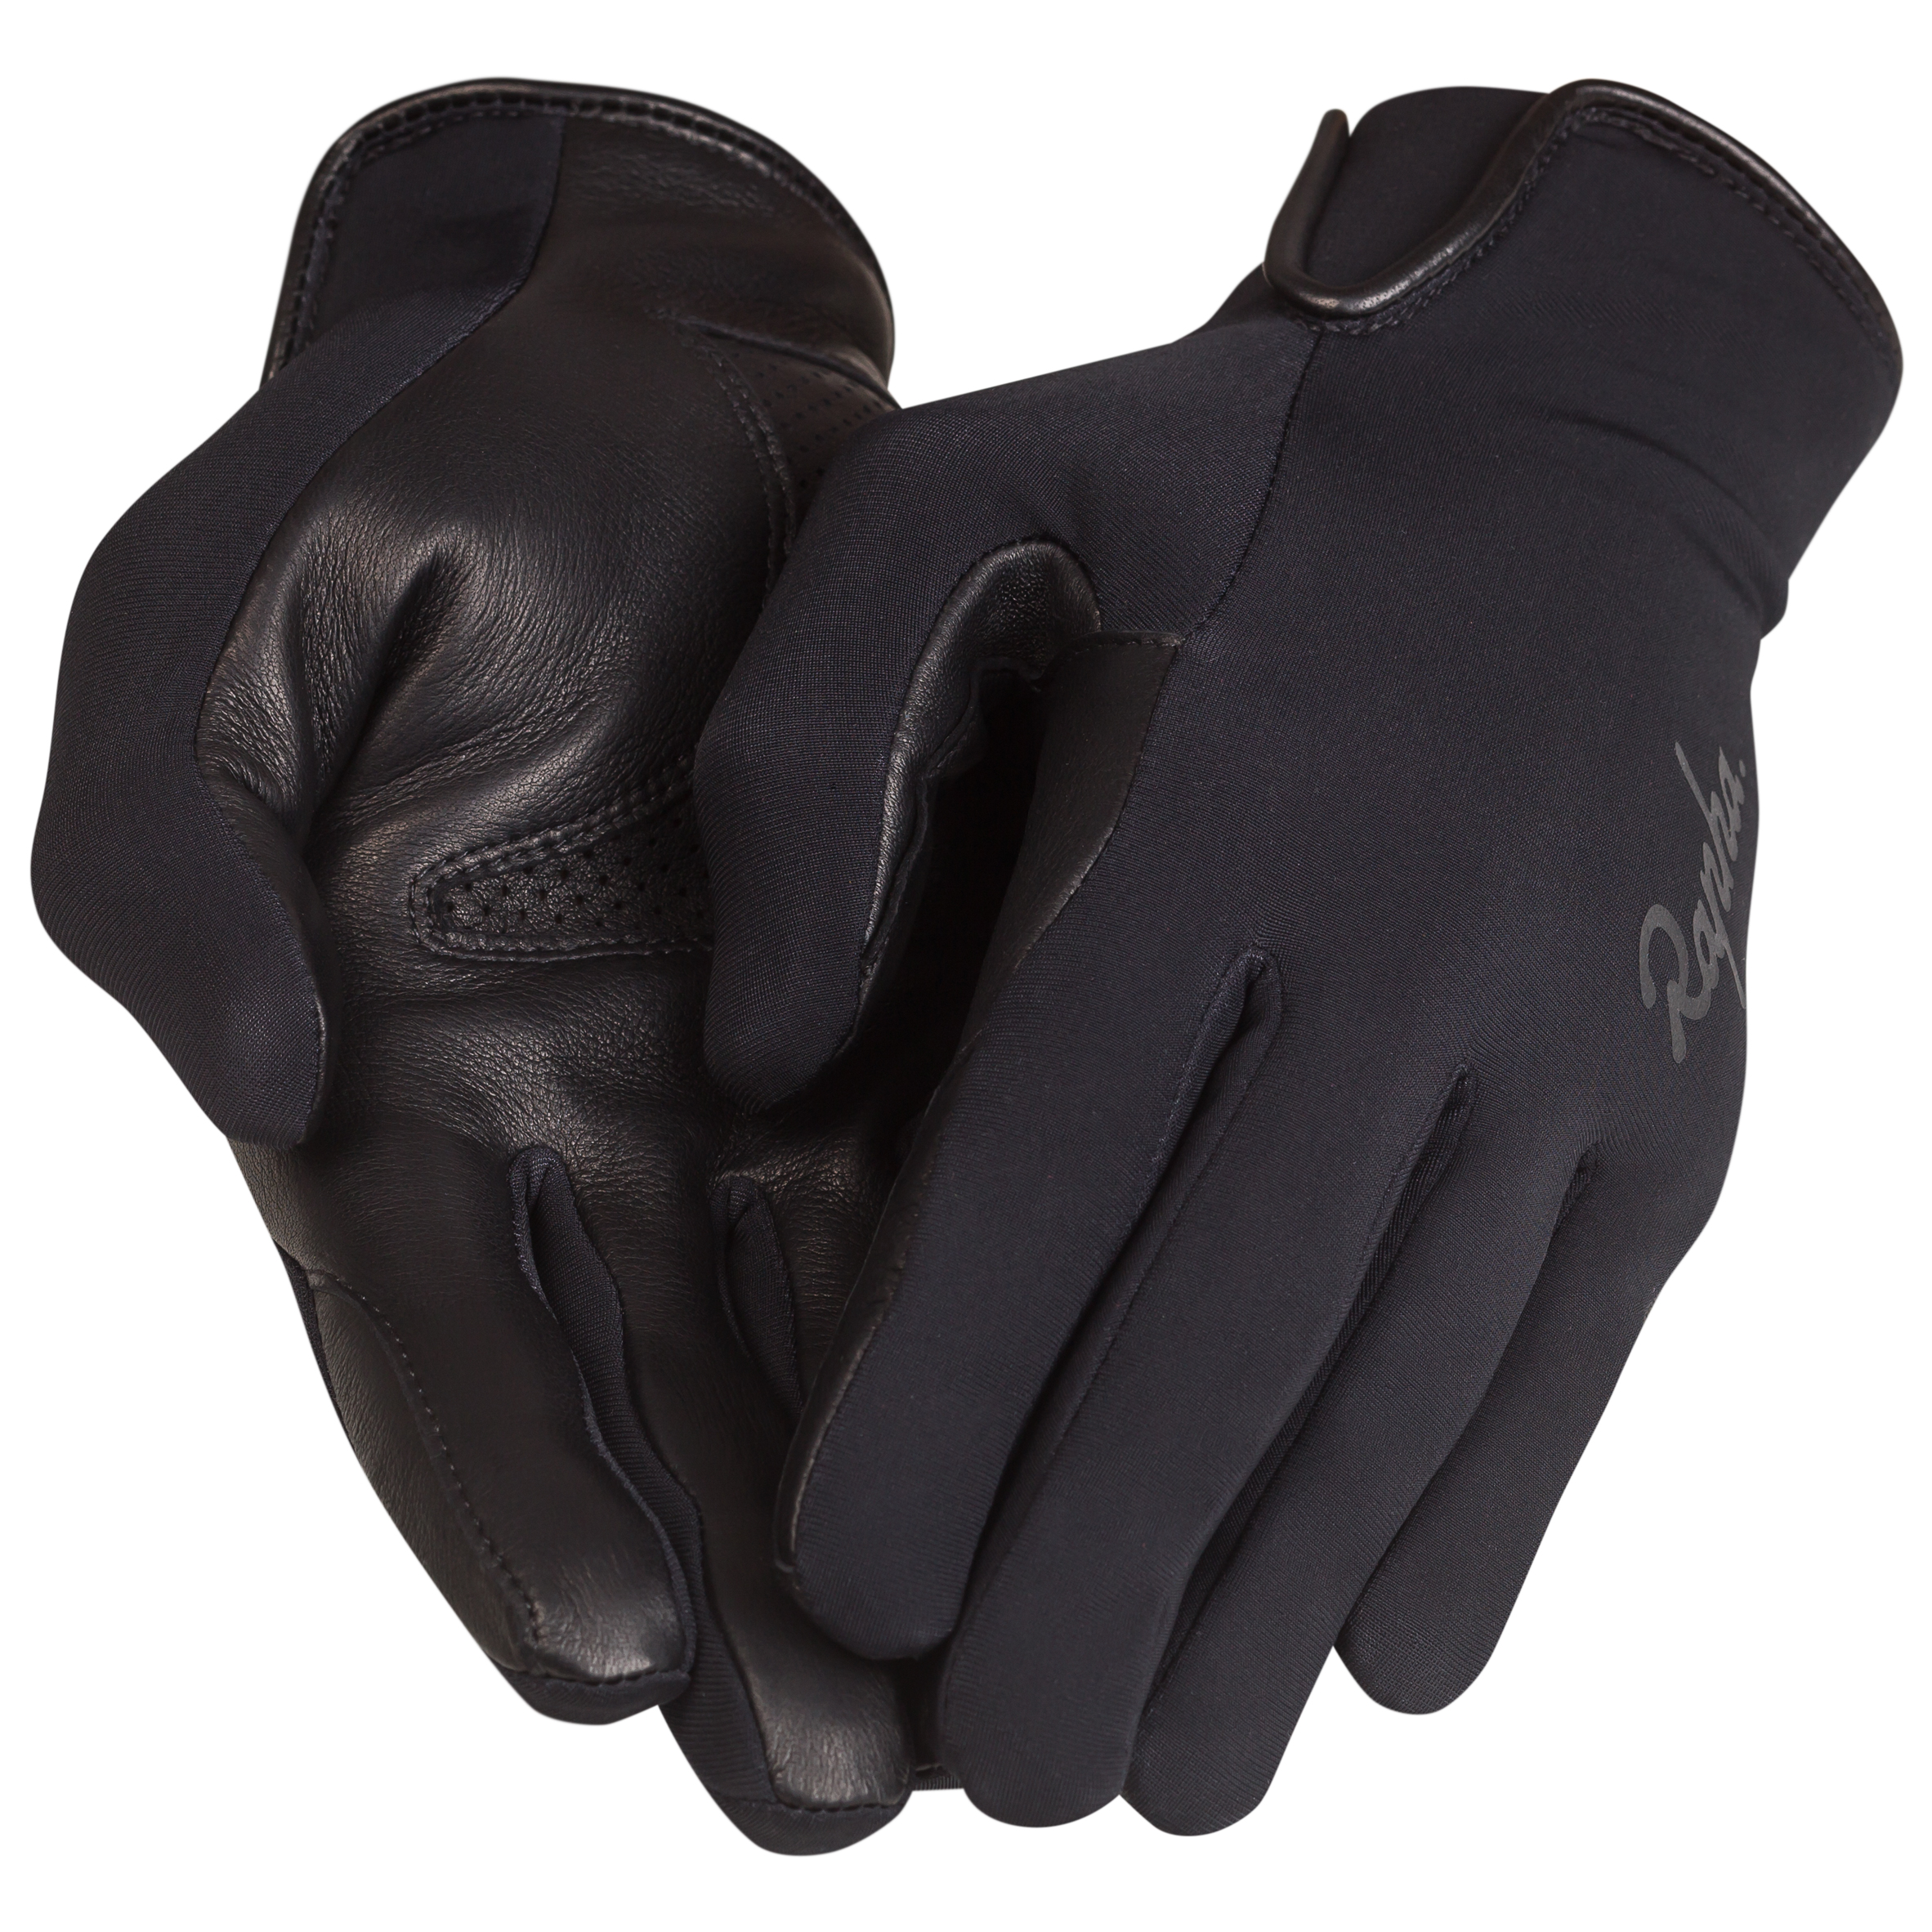 Classic Gloves by Rapha